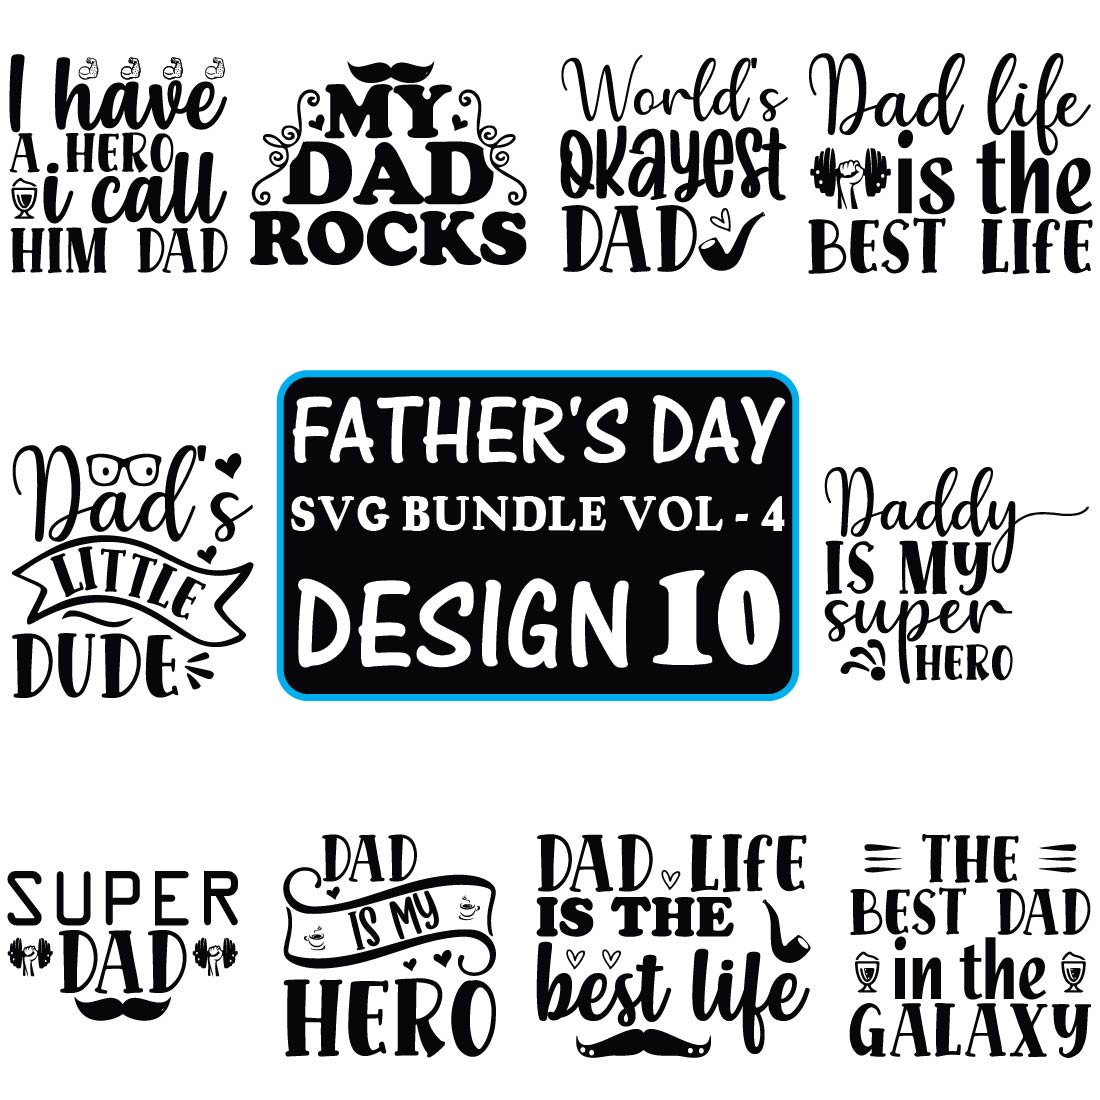 Father's Day SVG Bundle Vol - 4 preview image.